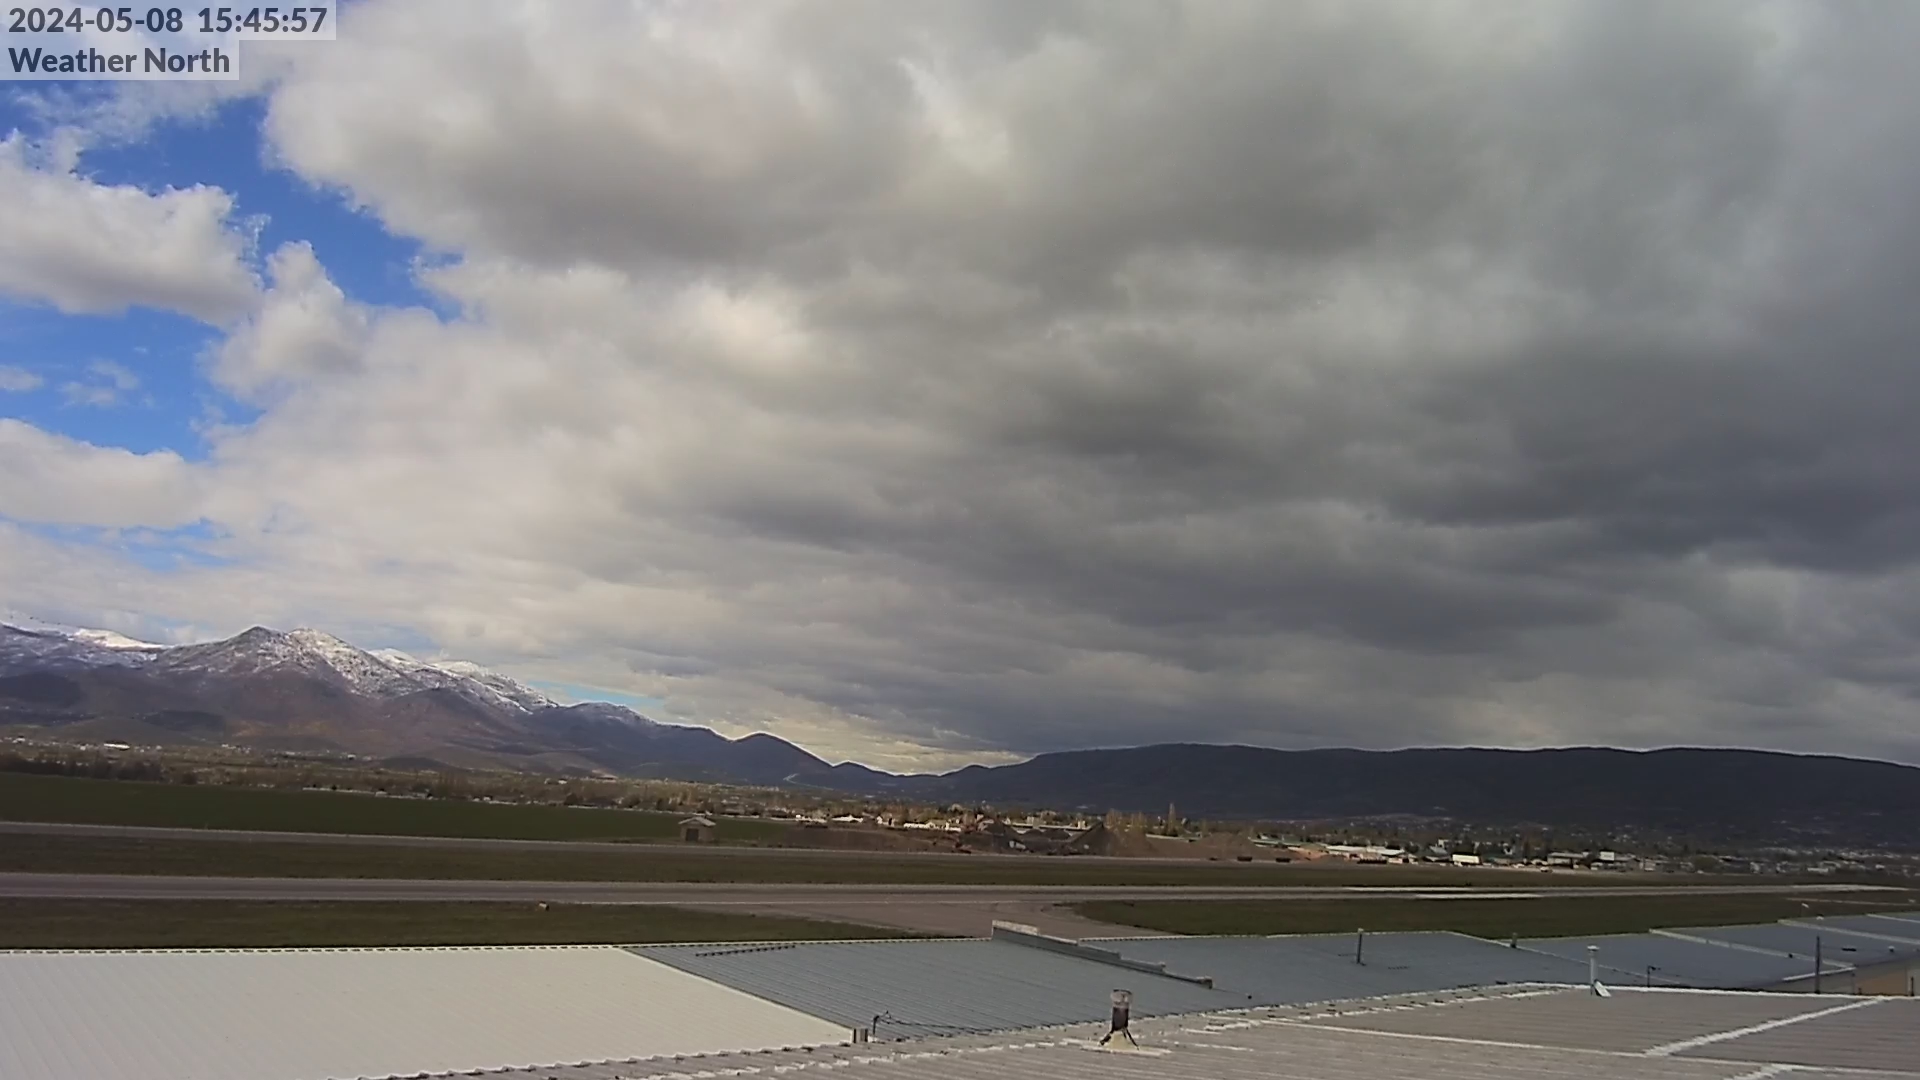 Weather North View, Real Time Airport Camera